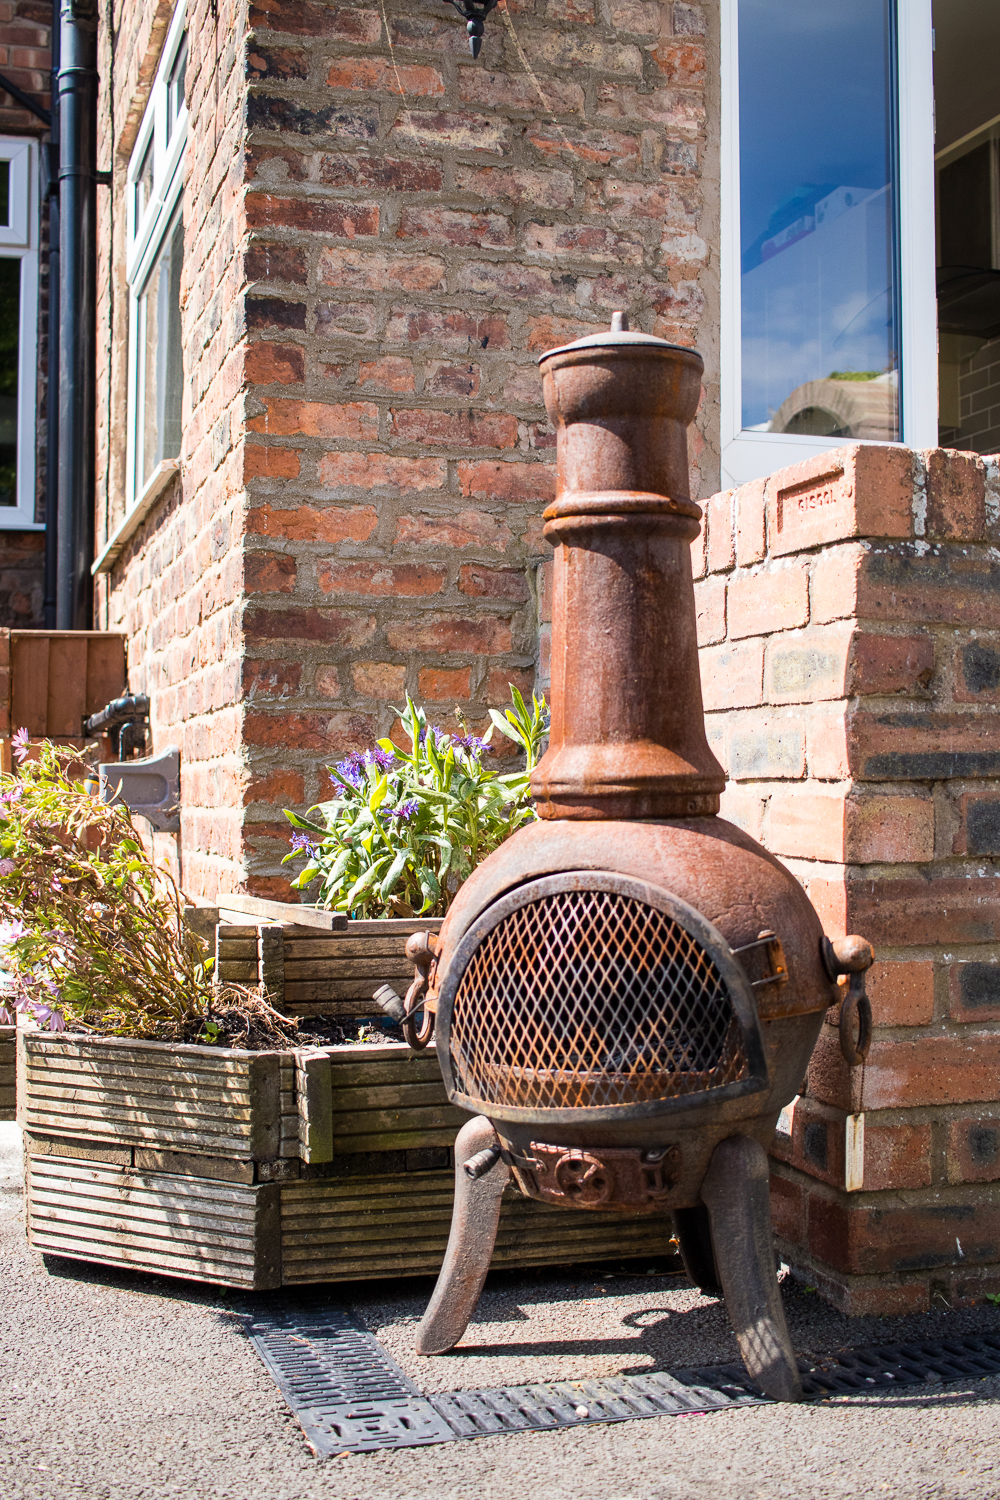 How To Treat A Rusty Chiminea - WELL I GUESS THIS IS GROWING UP